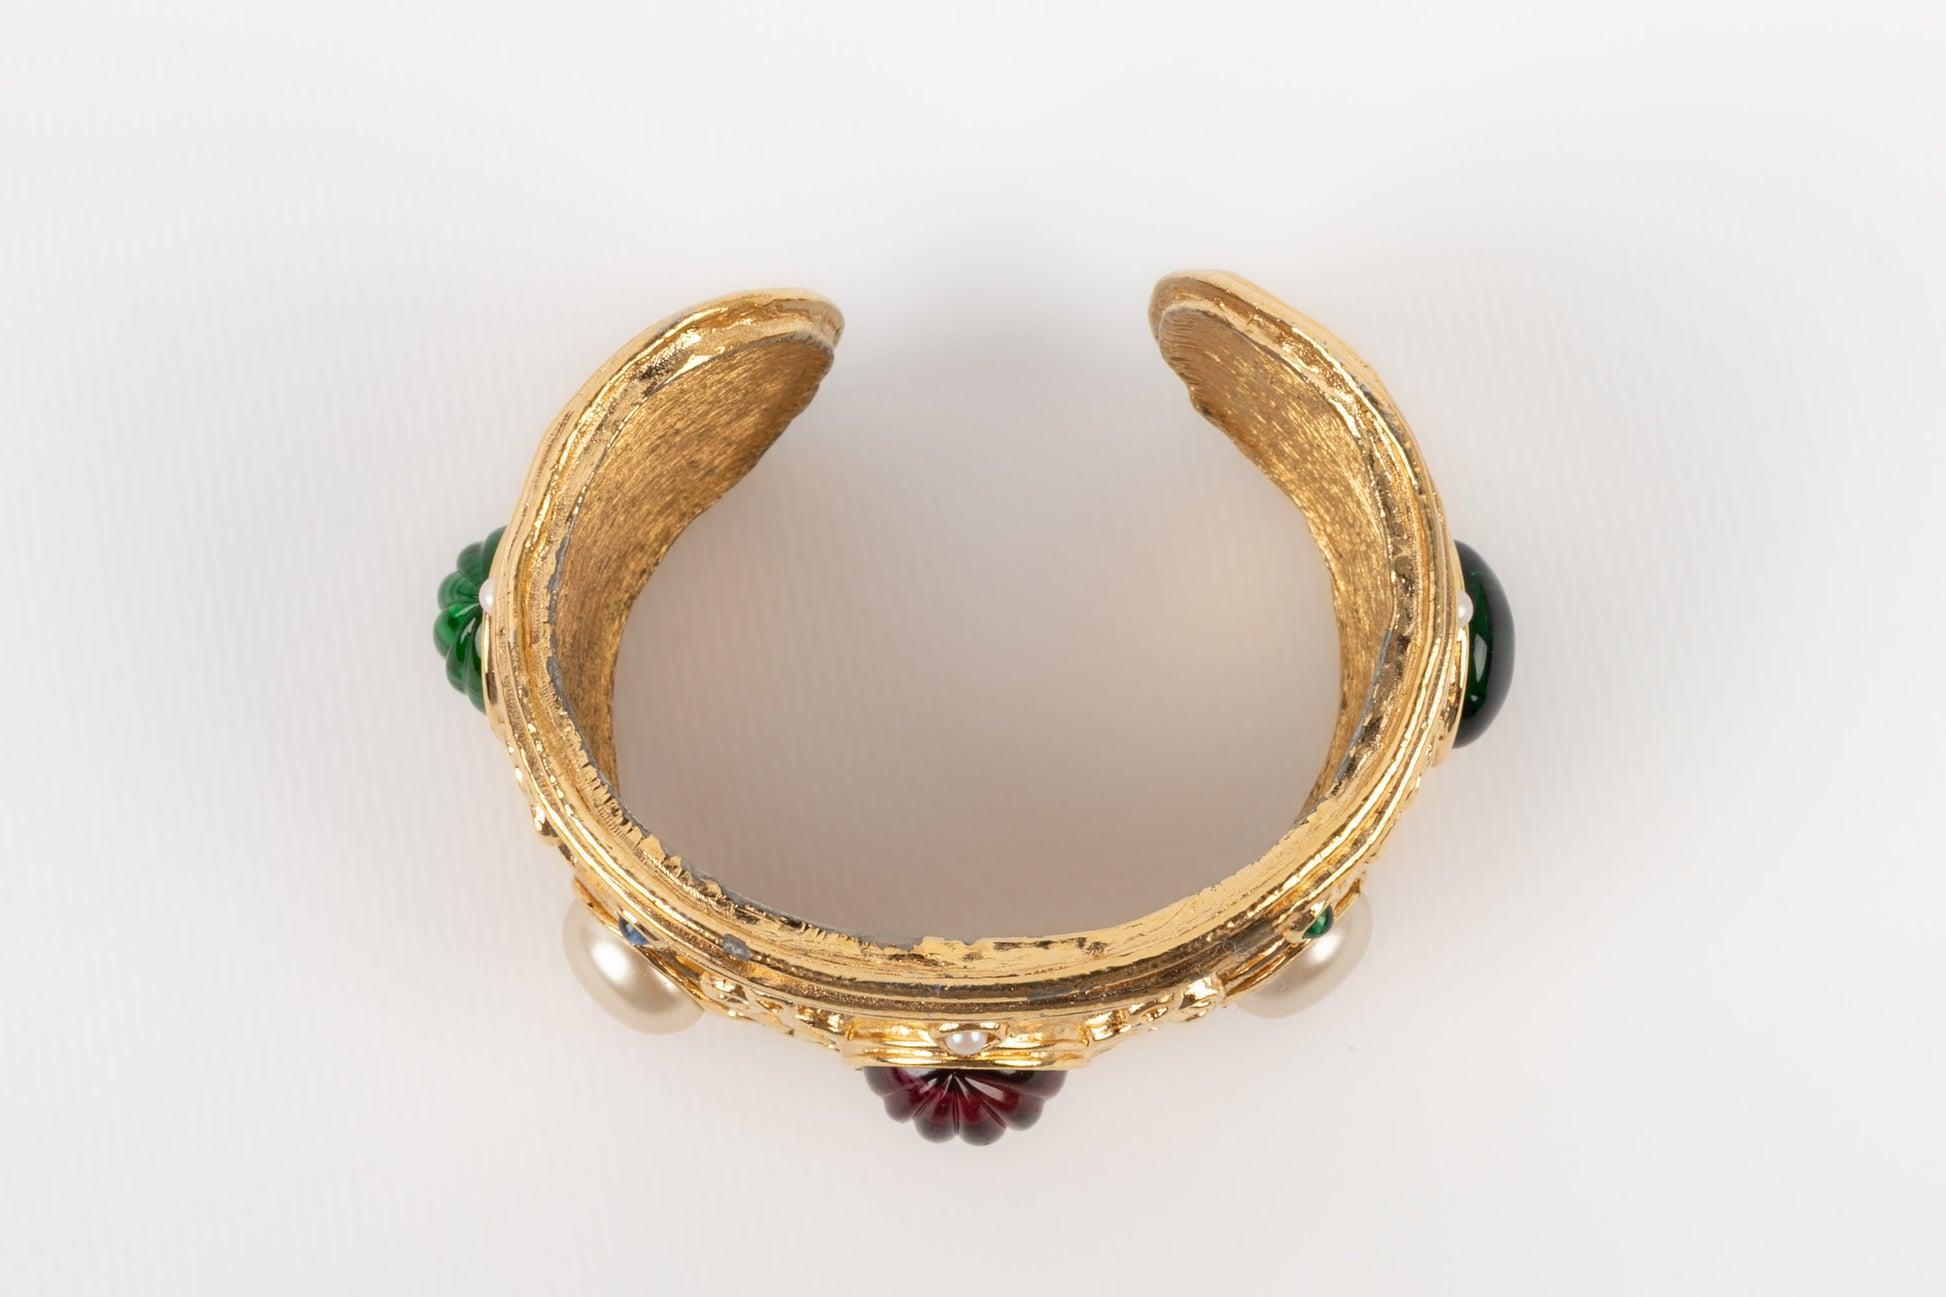 Dior - Golden metal bracelet ornamented with pearly and glass paste cabochons.

Additional information:
Condition: Very good condition
Dimensions: Length: 14.5 cm - Opening: 2.2 cm

Seller Reference: BRA156